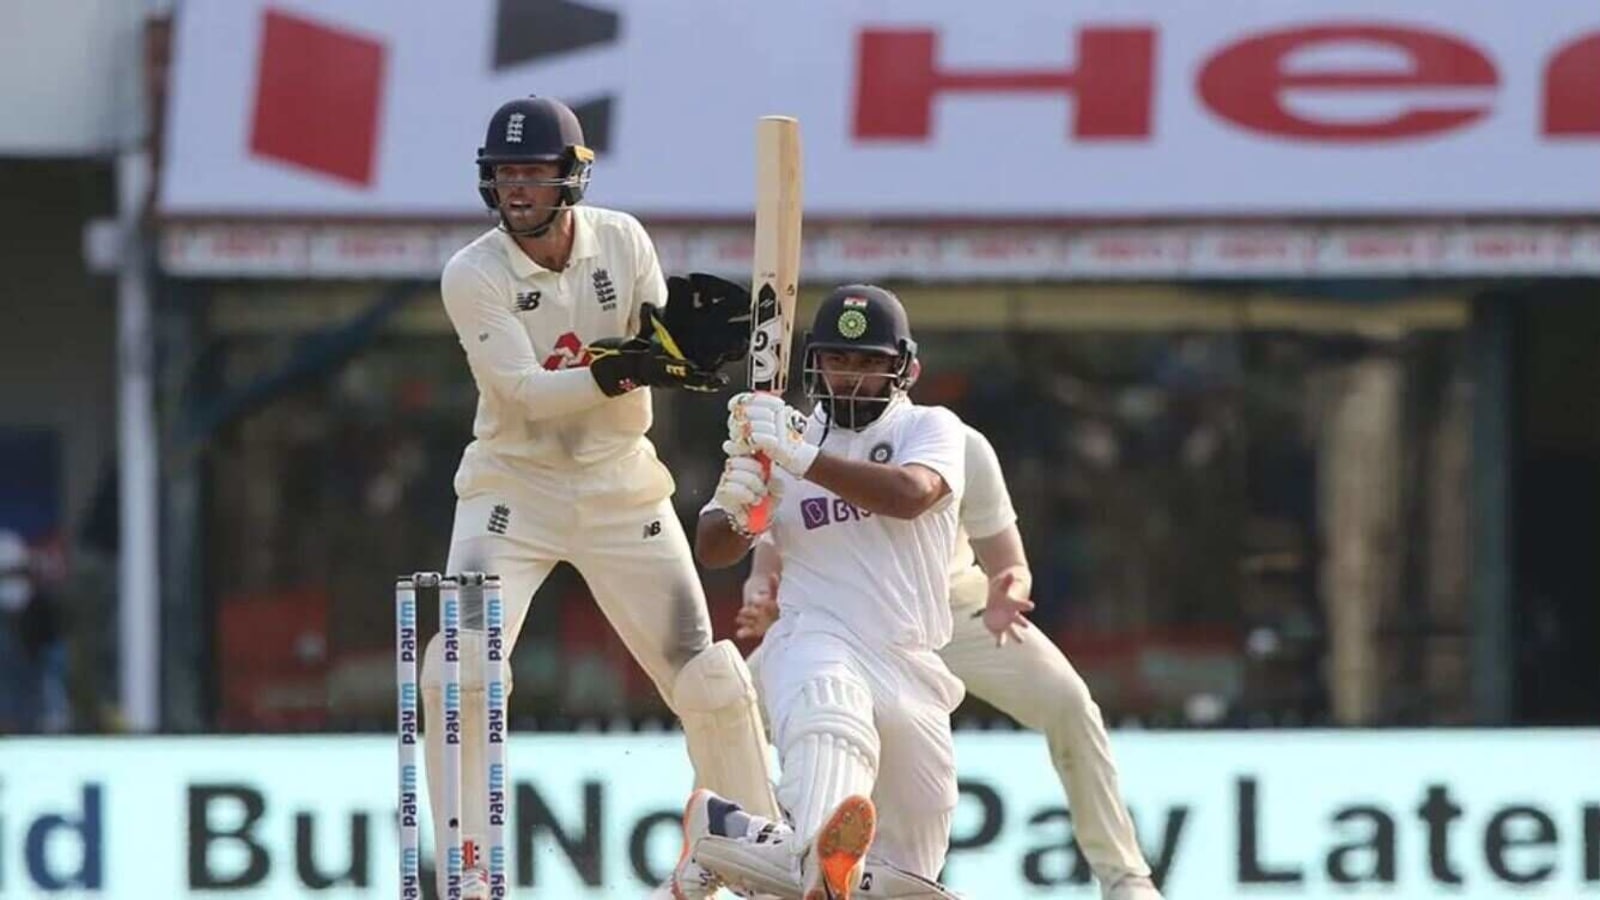 IND vs ENG 2nd Test, Day 1 highlights Pant, Axar take India to 300/6 at stumps Hindustan Times